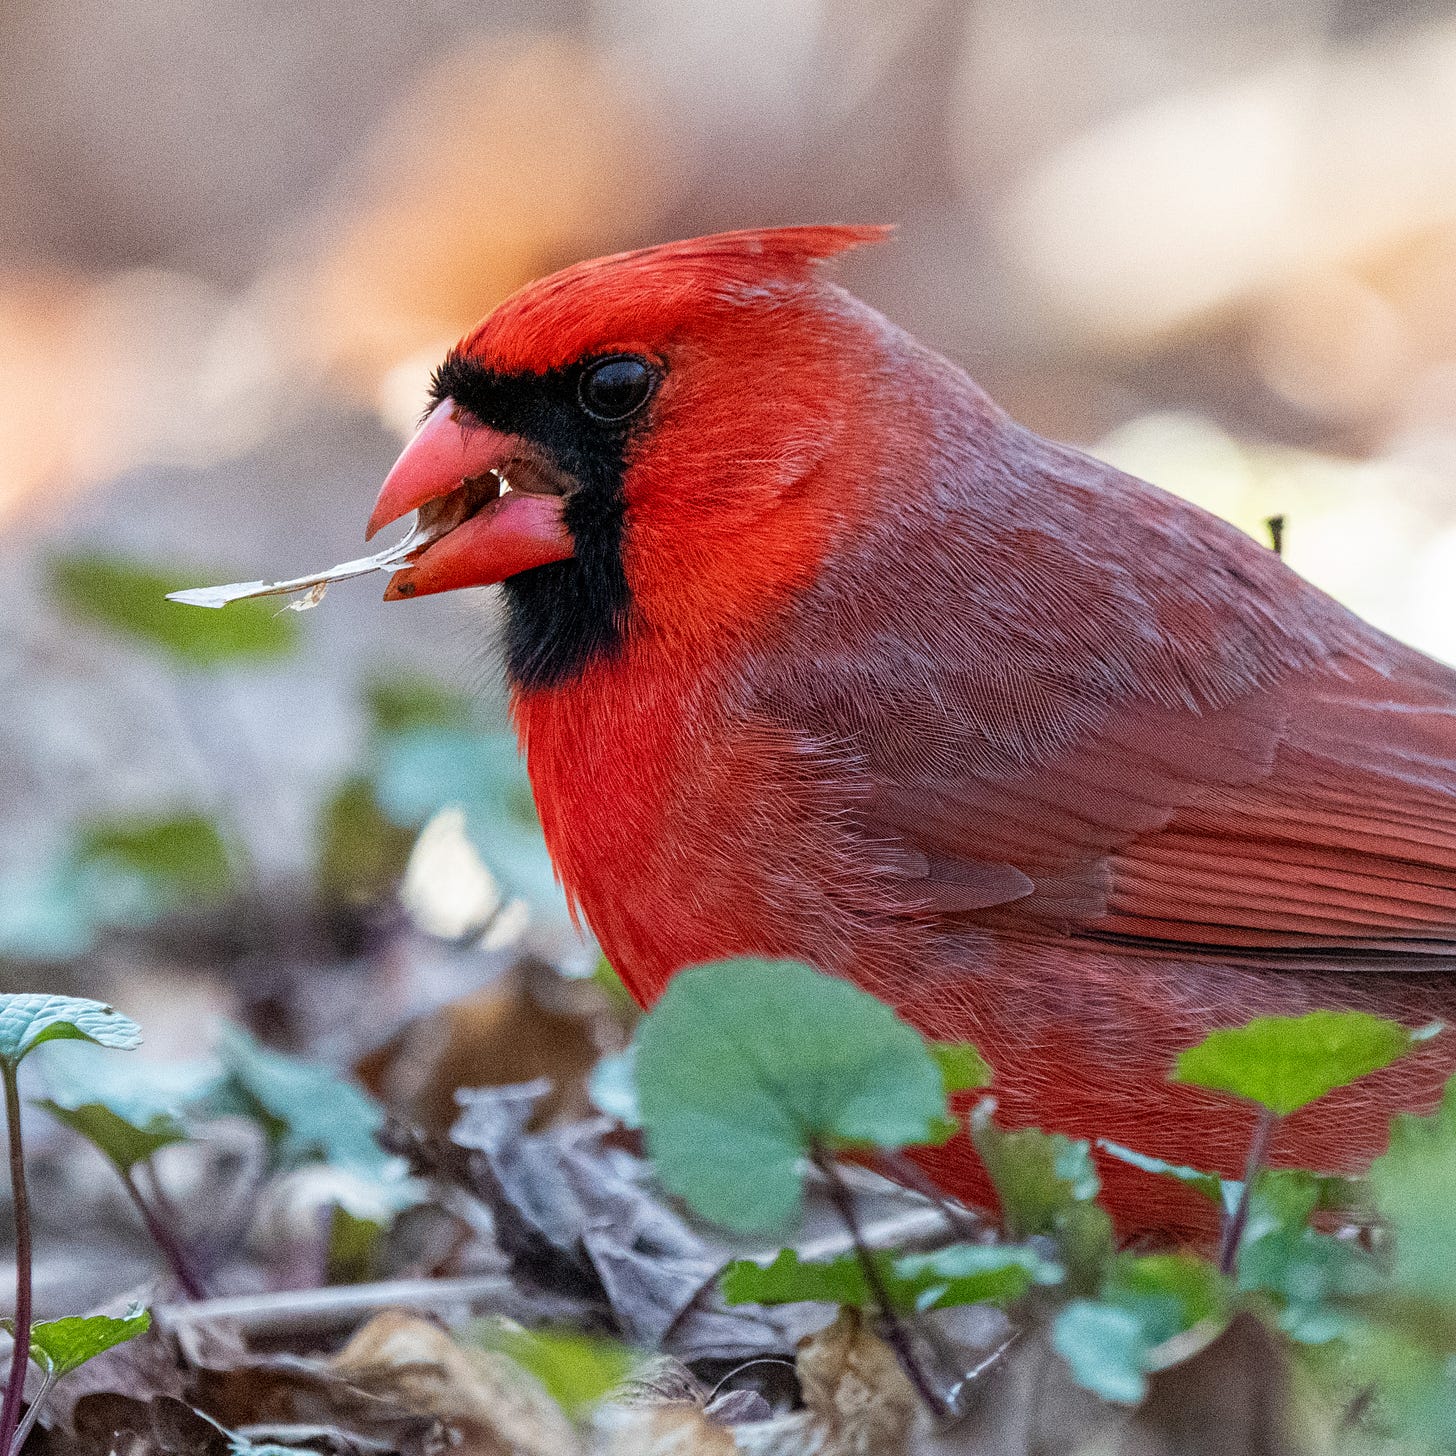 Close-up of a bright red male northern cardinal, extracting the seed from a samara